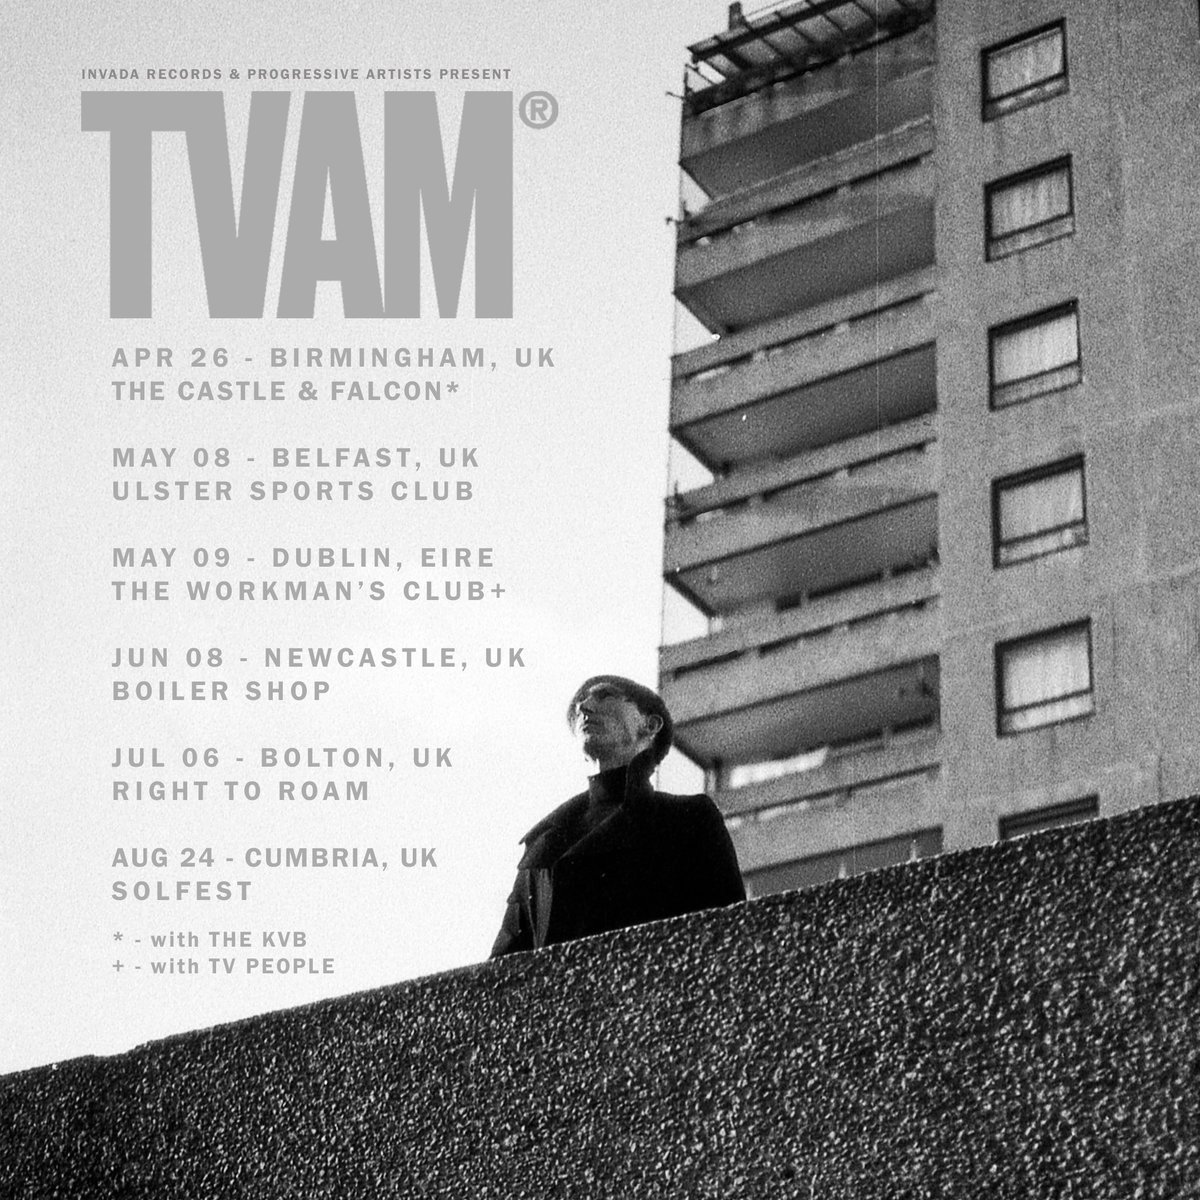 Upcoming shows: BIRMINGHAM, UK – APR 26^ BELFAST, UK – MAY 08 DUBLIN, EIRE – MAY 09+ NEWCASTLE, UK – JUN 08 BOLTON, UK – JUL 06 CUMBRIA, UK – AUG 24 ^- with @TheKVB +- with @tvpeople_band Tickets now on sale – tvamindustries.com/tour/